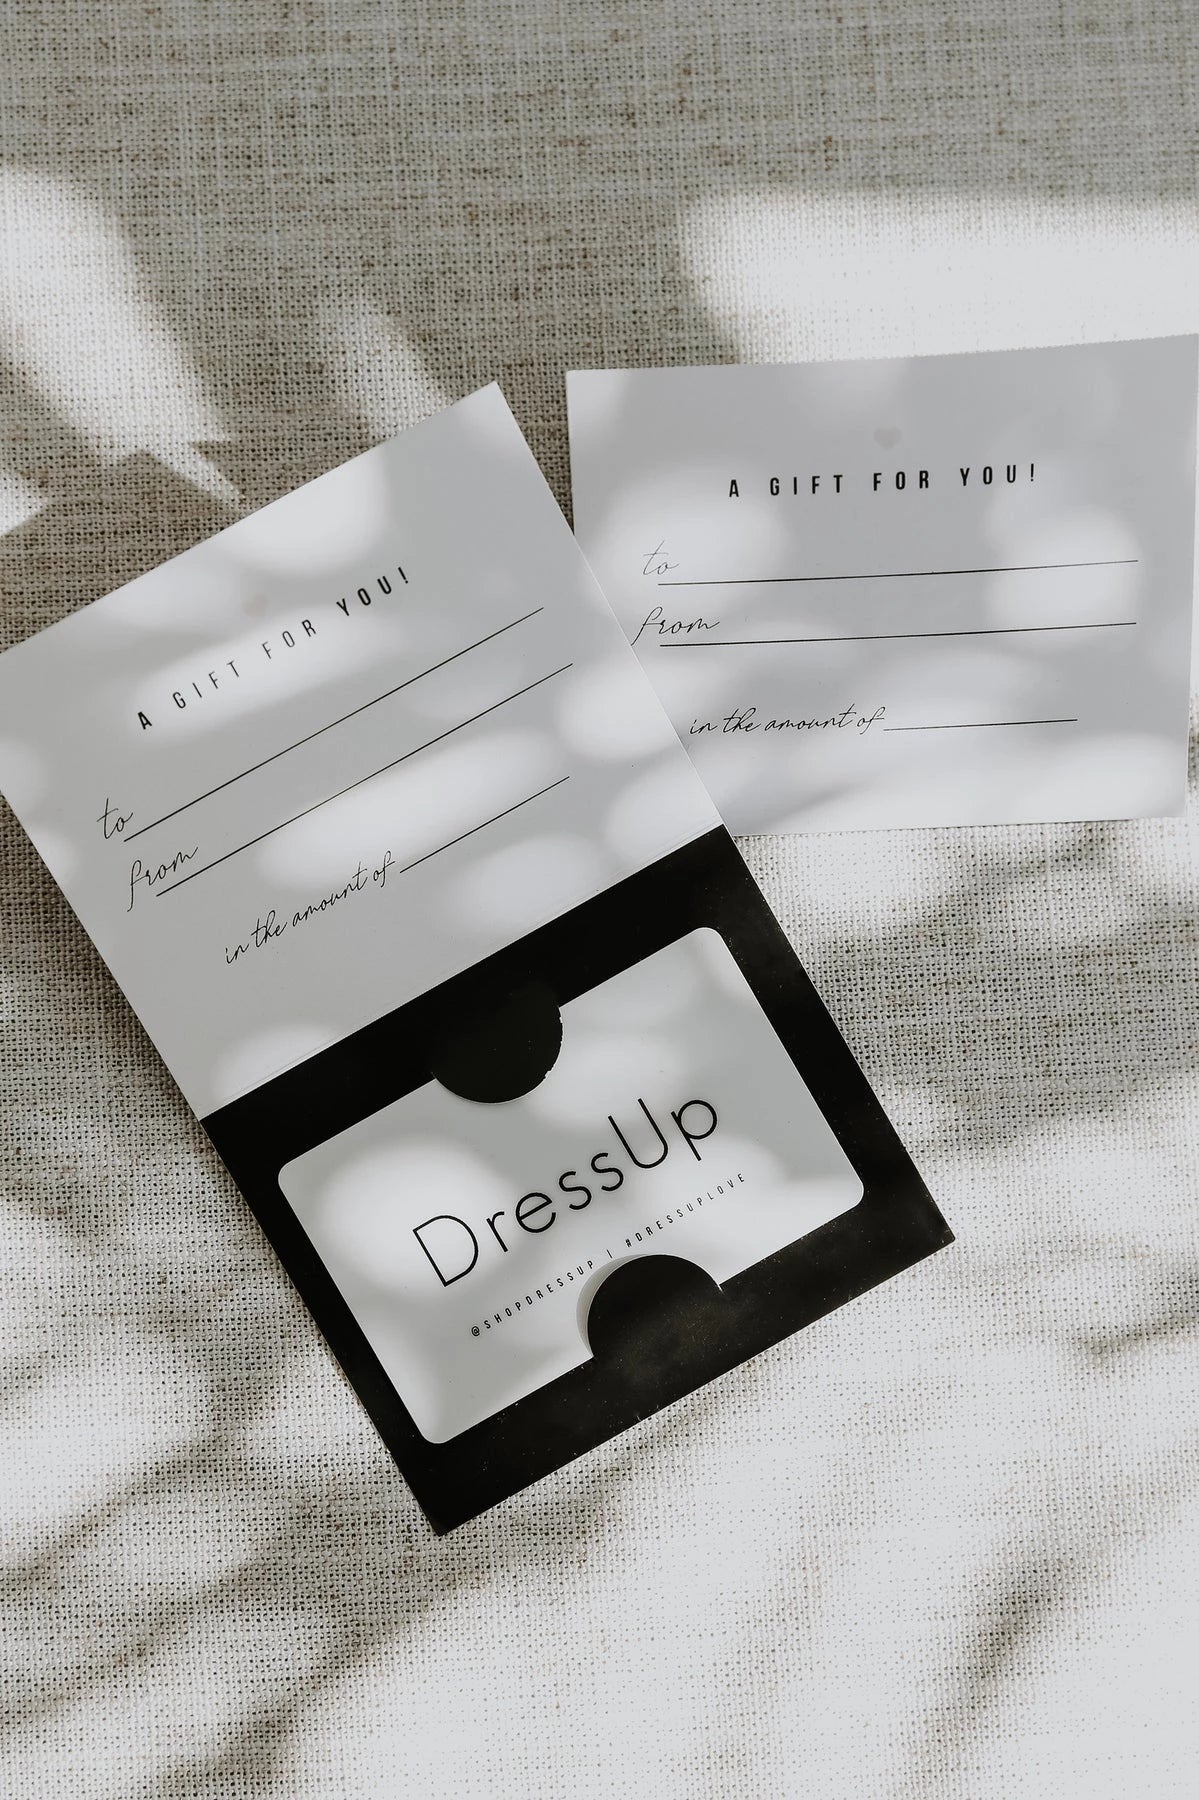 Dress Up Gift Cards From shopdressup.com